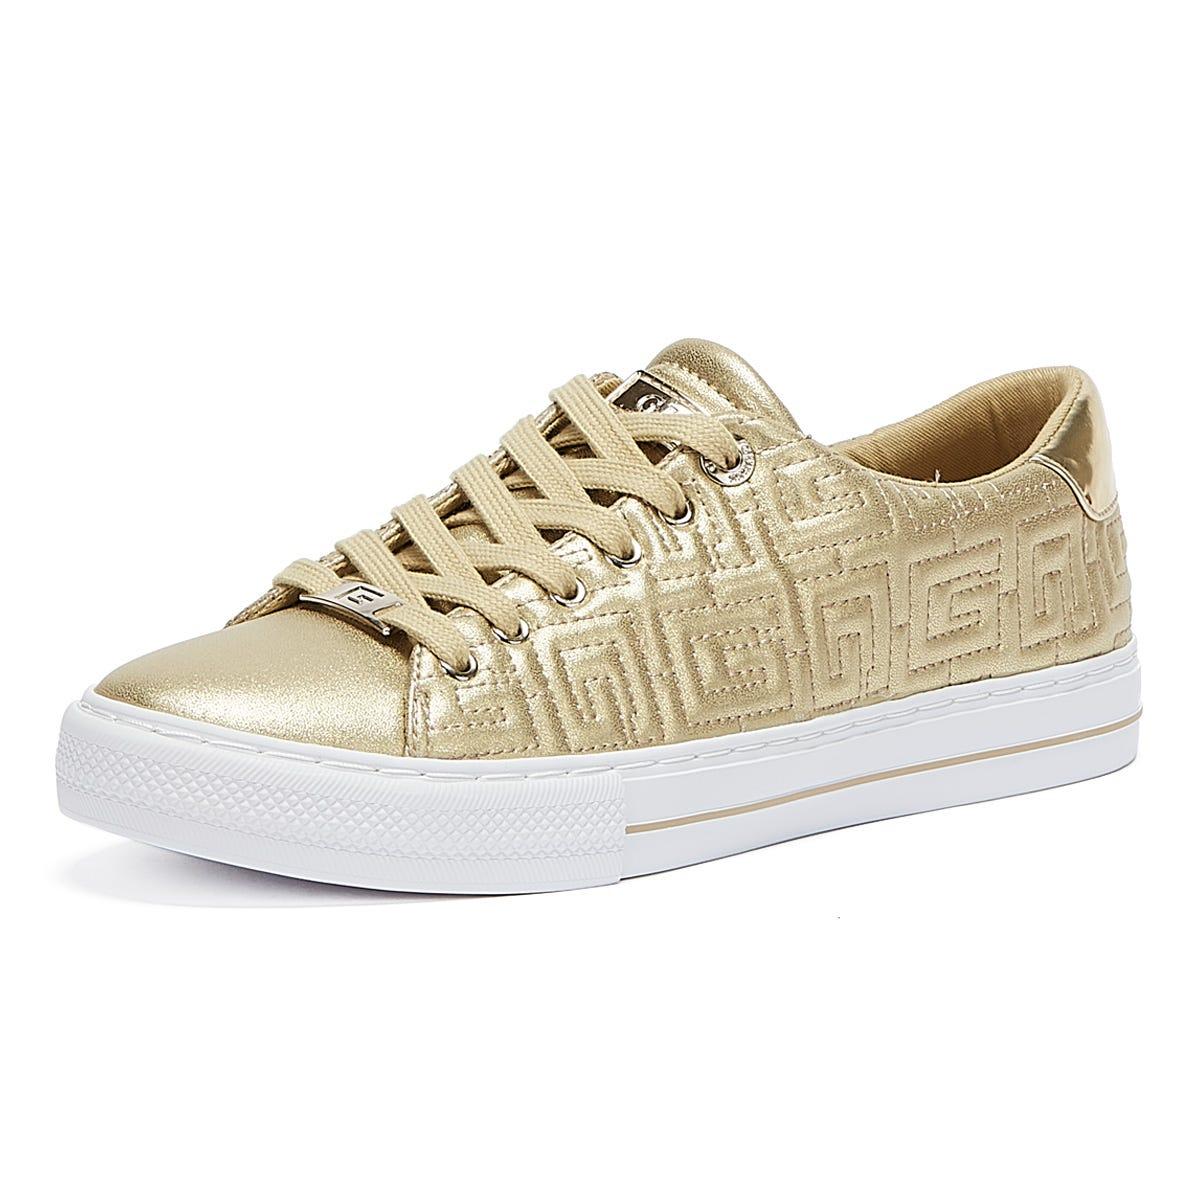 Guess Enn Trainers in Gold (Metallic) - Lyst